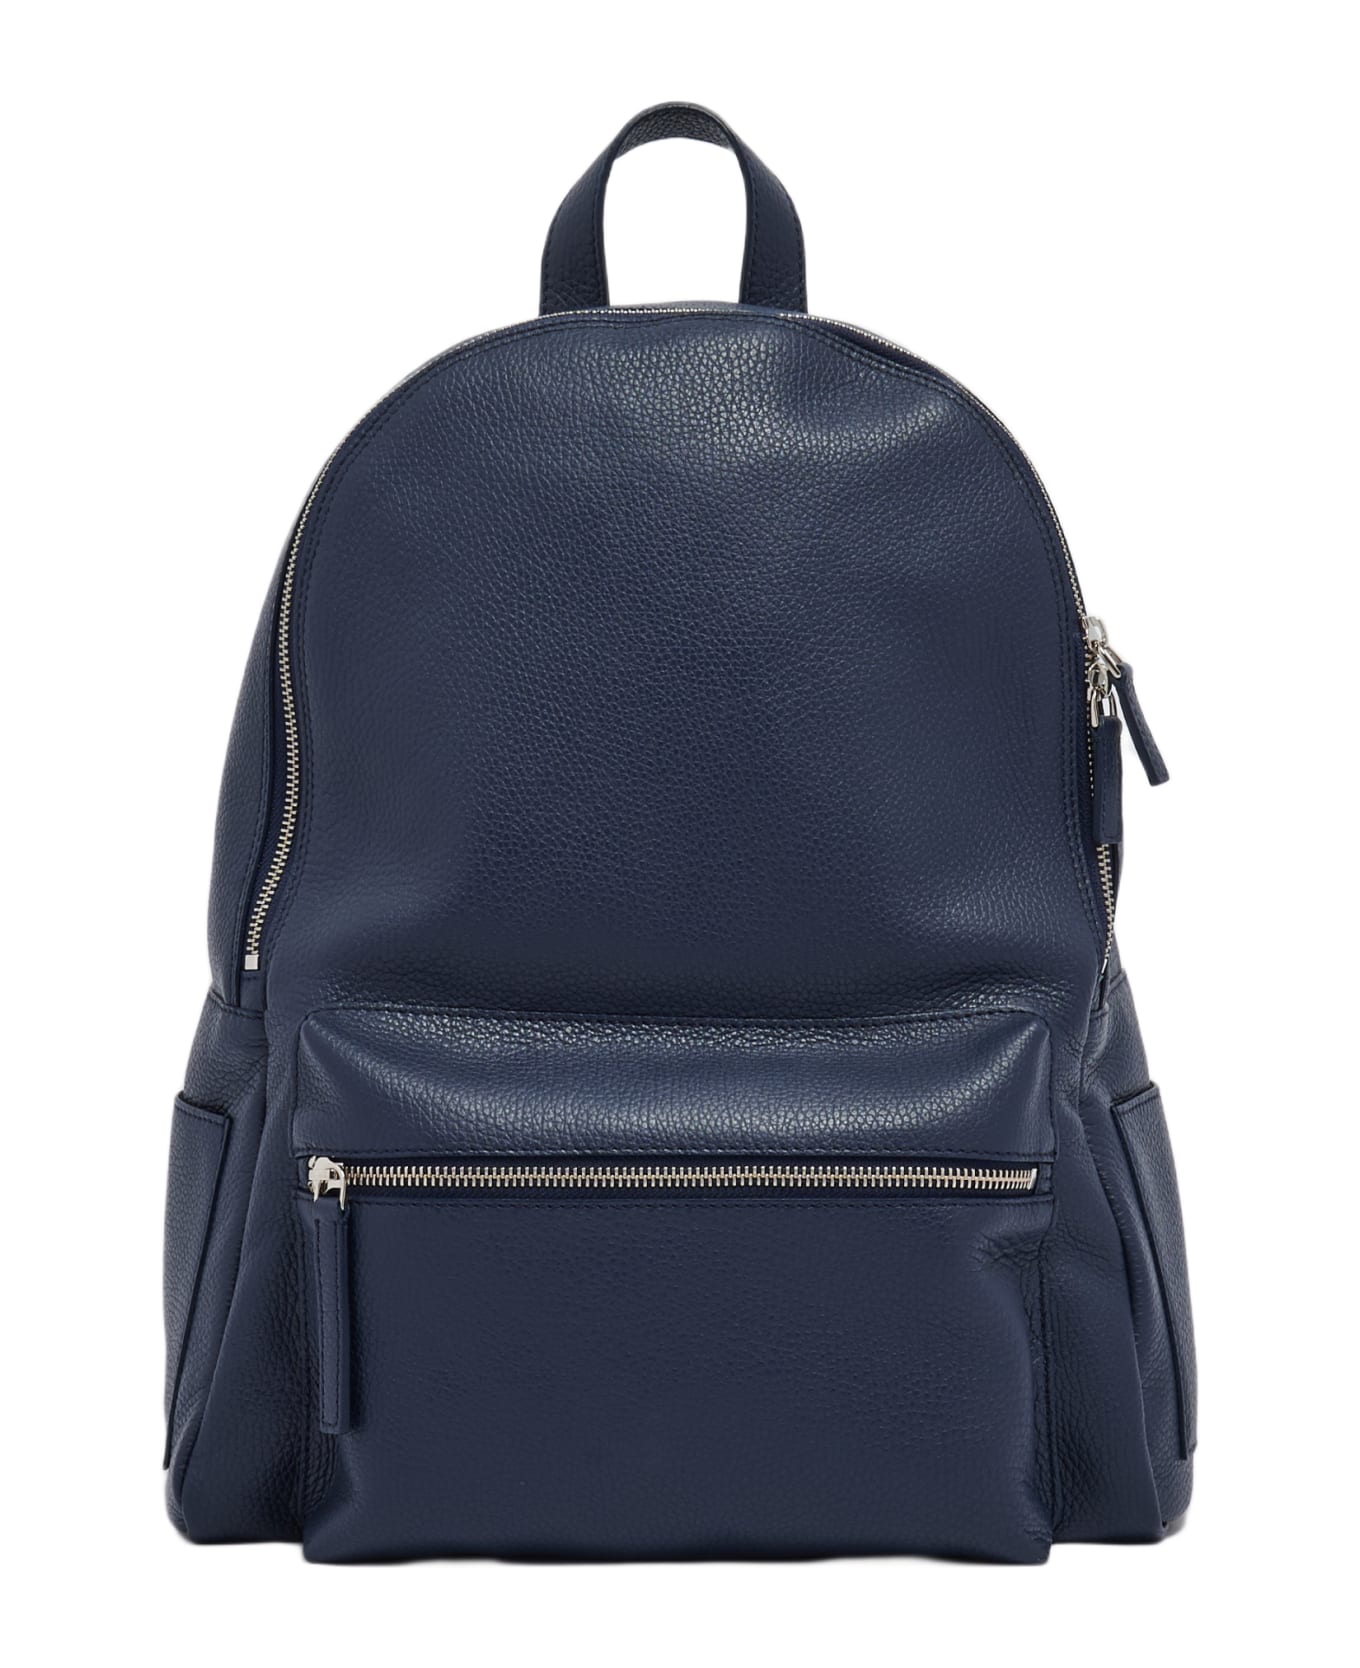 Orciani Zaino Micron Backpack - NAVY バックパック